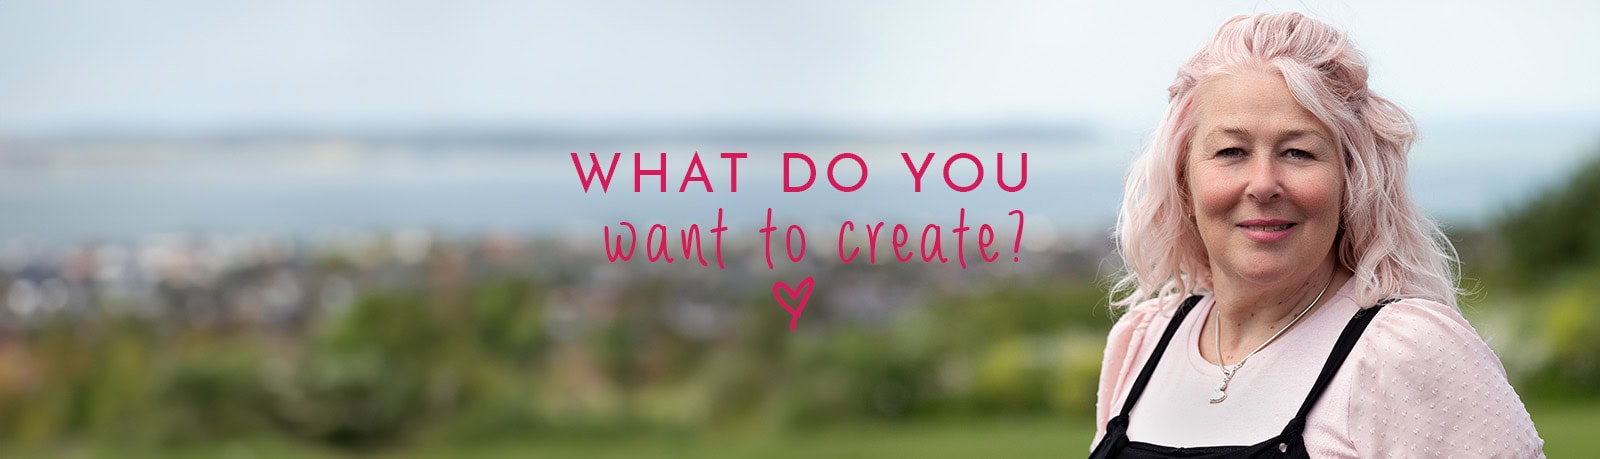 What do you want to create